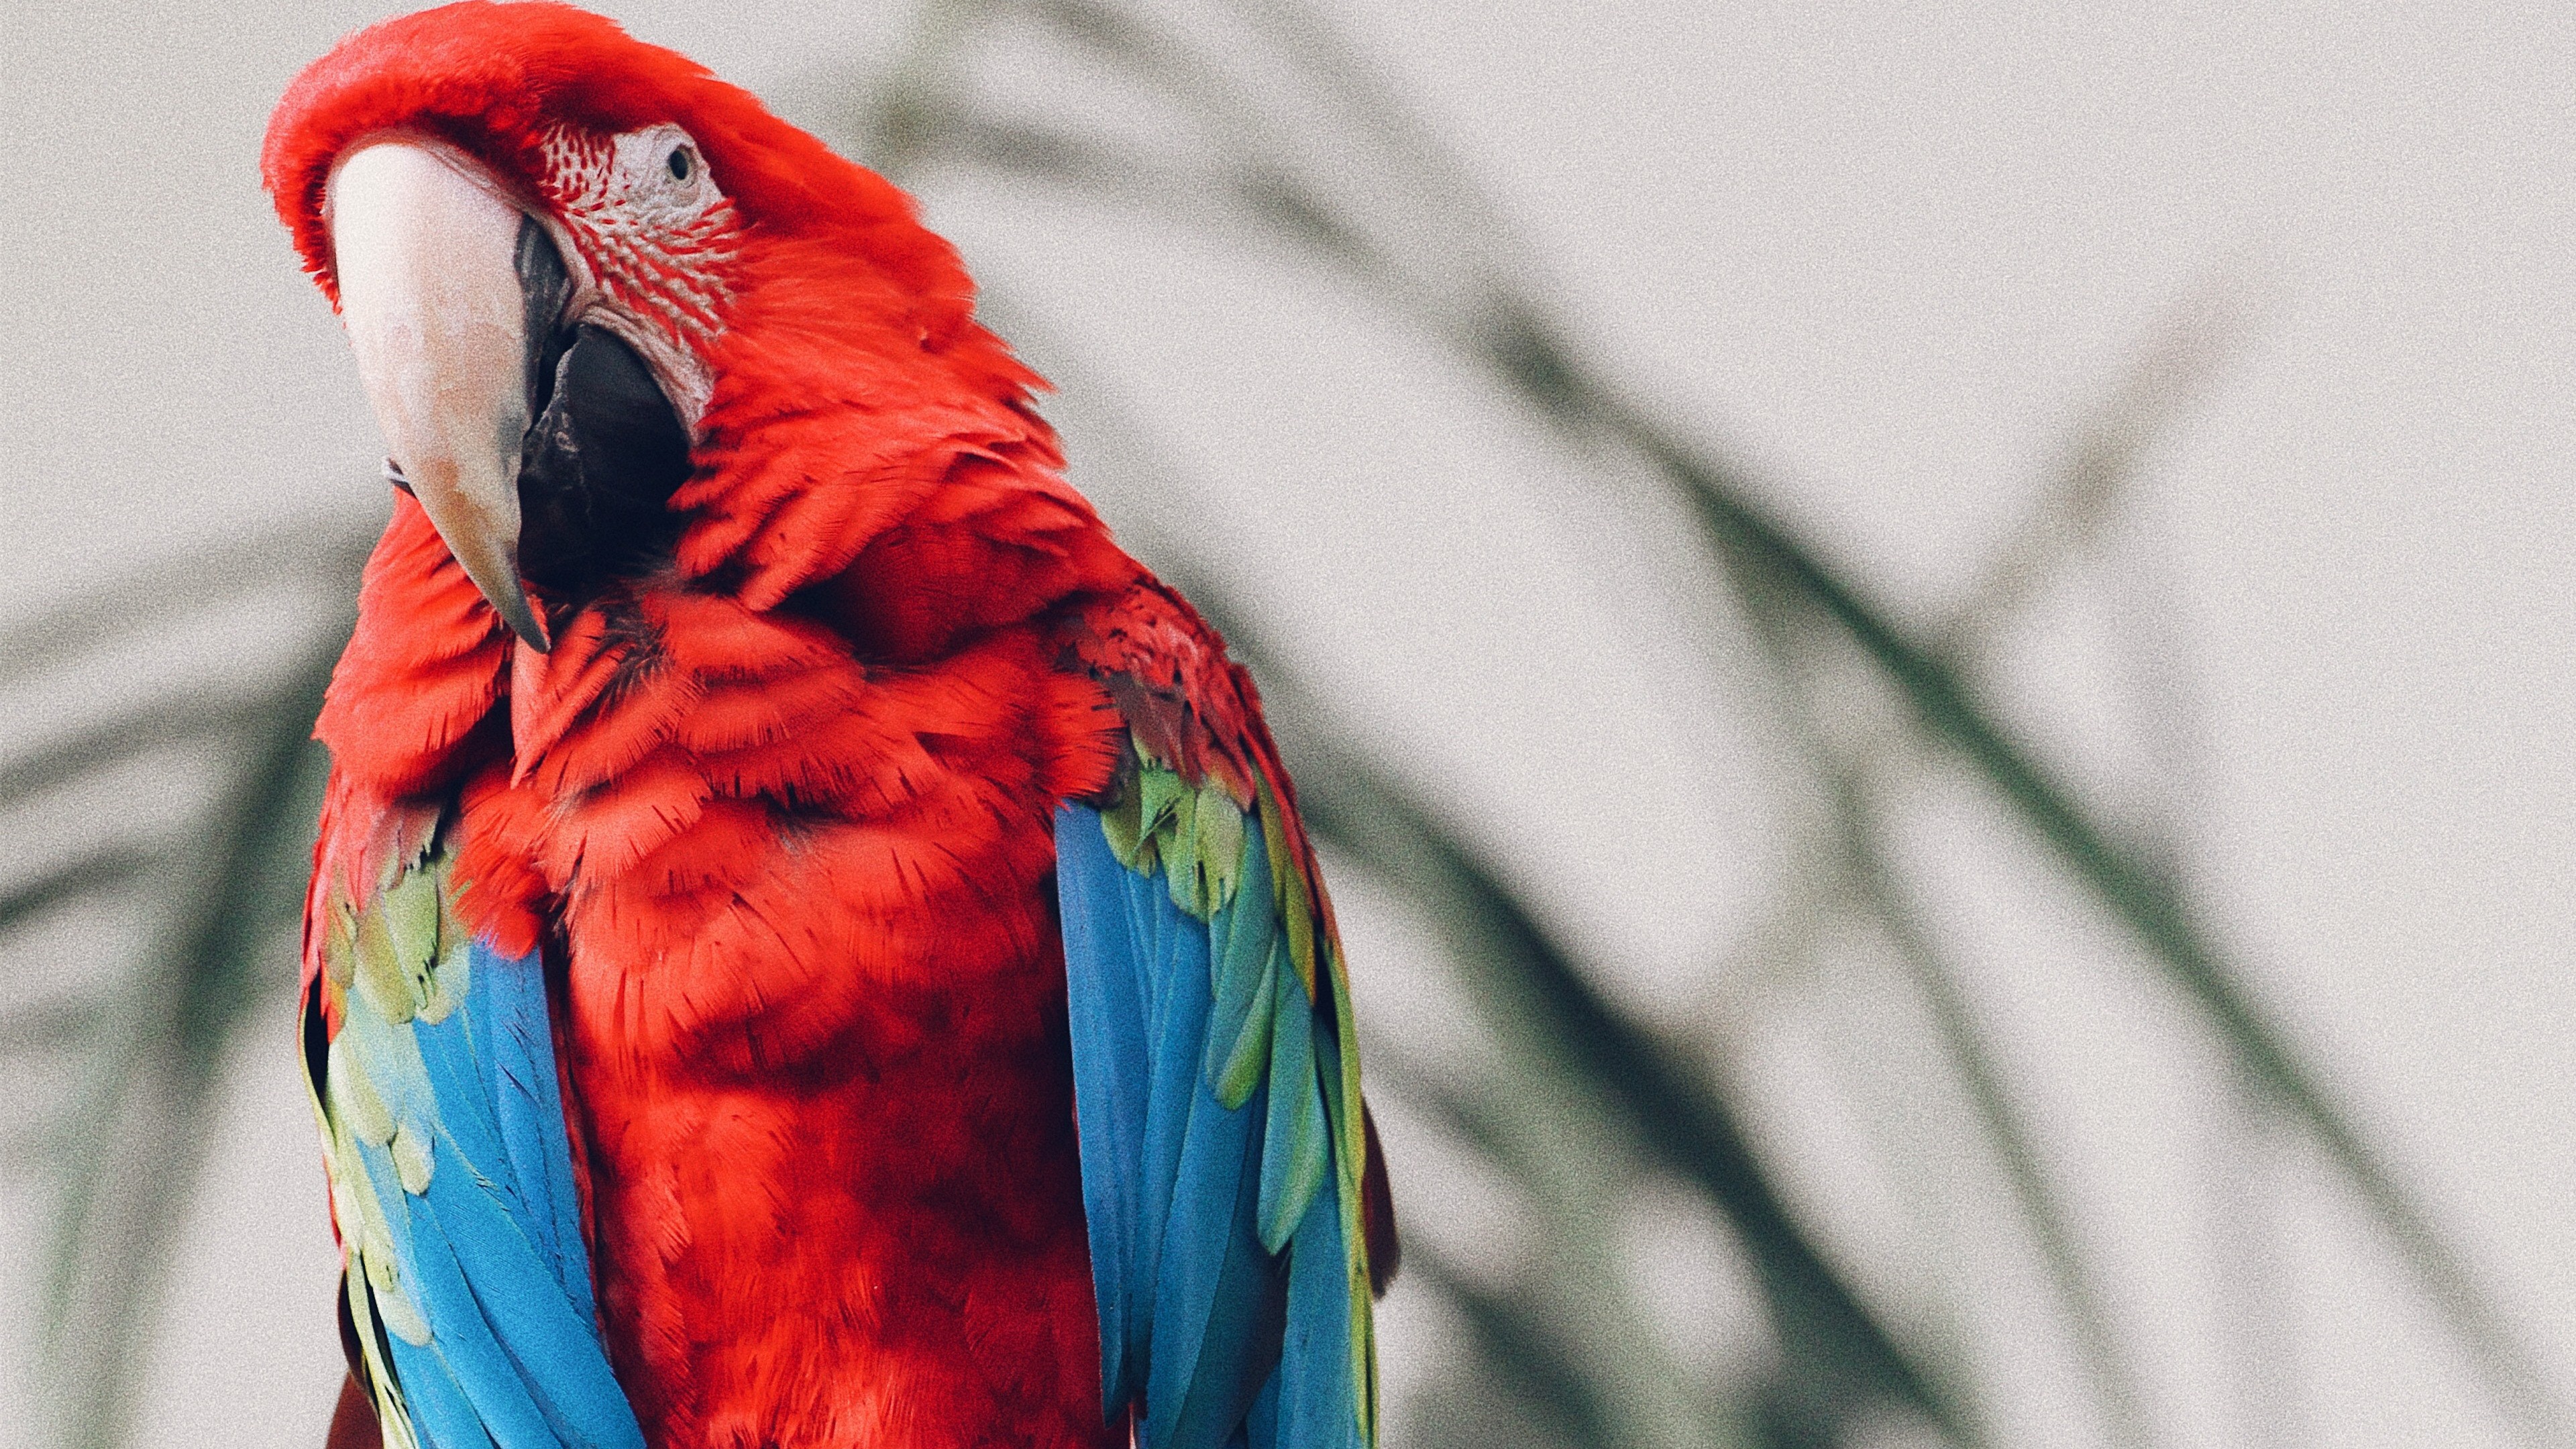 Keen Colorful Macaw Parrot 4k Images - Macaw Parrot 4k - HD Wallpaper 